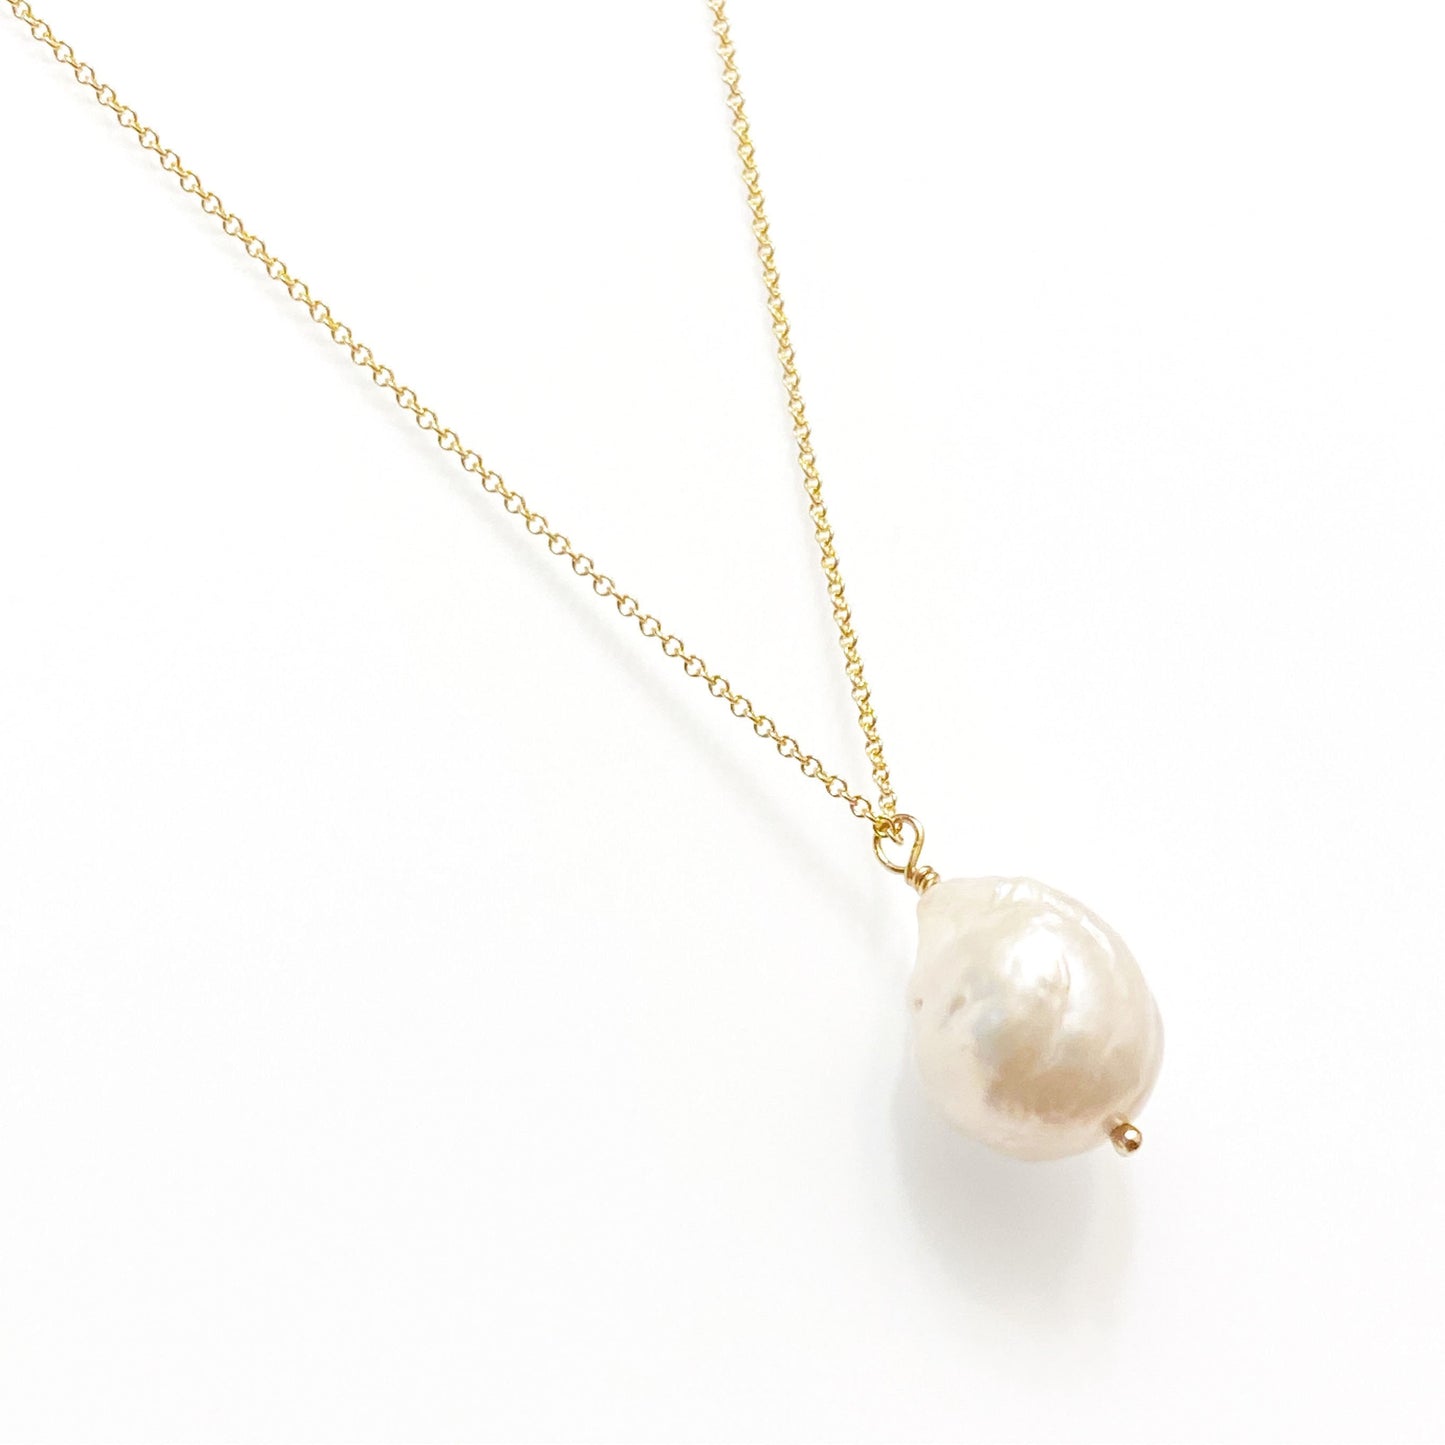 Freshwater baroque pearl necklace (14K gold-filled)